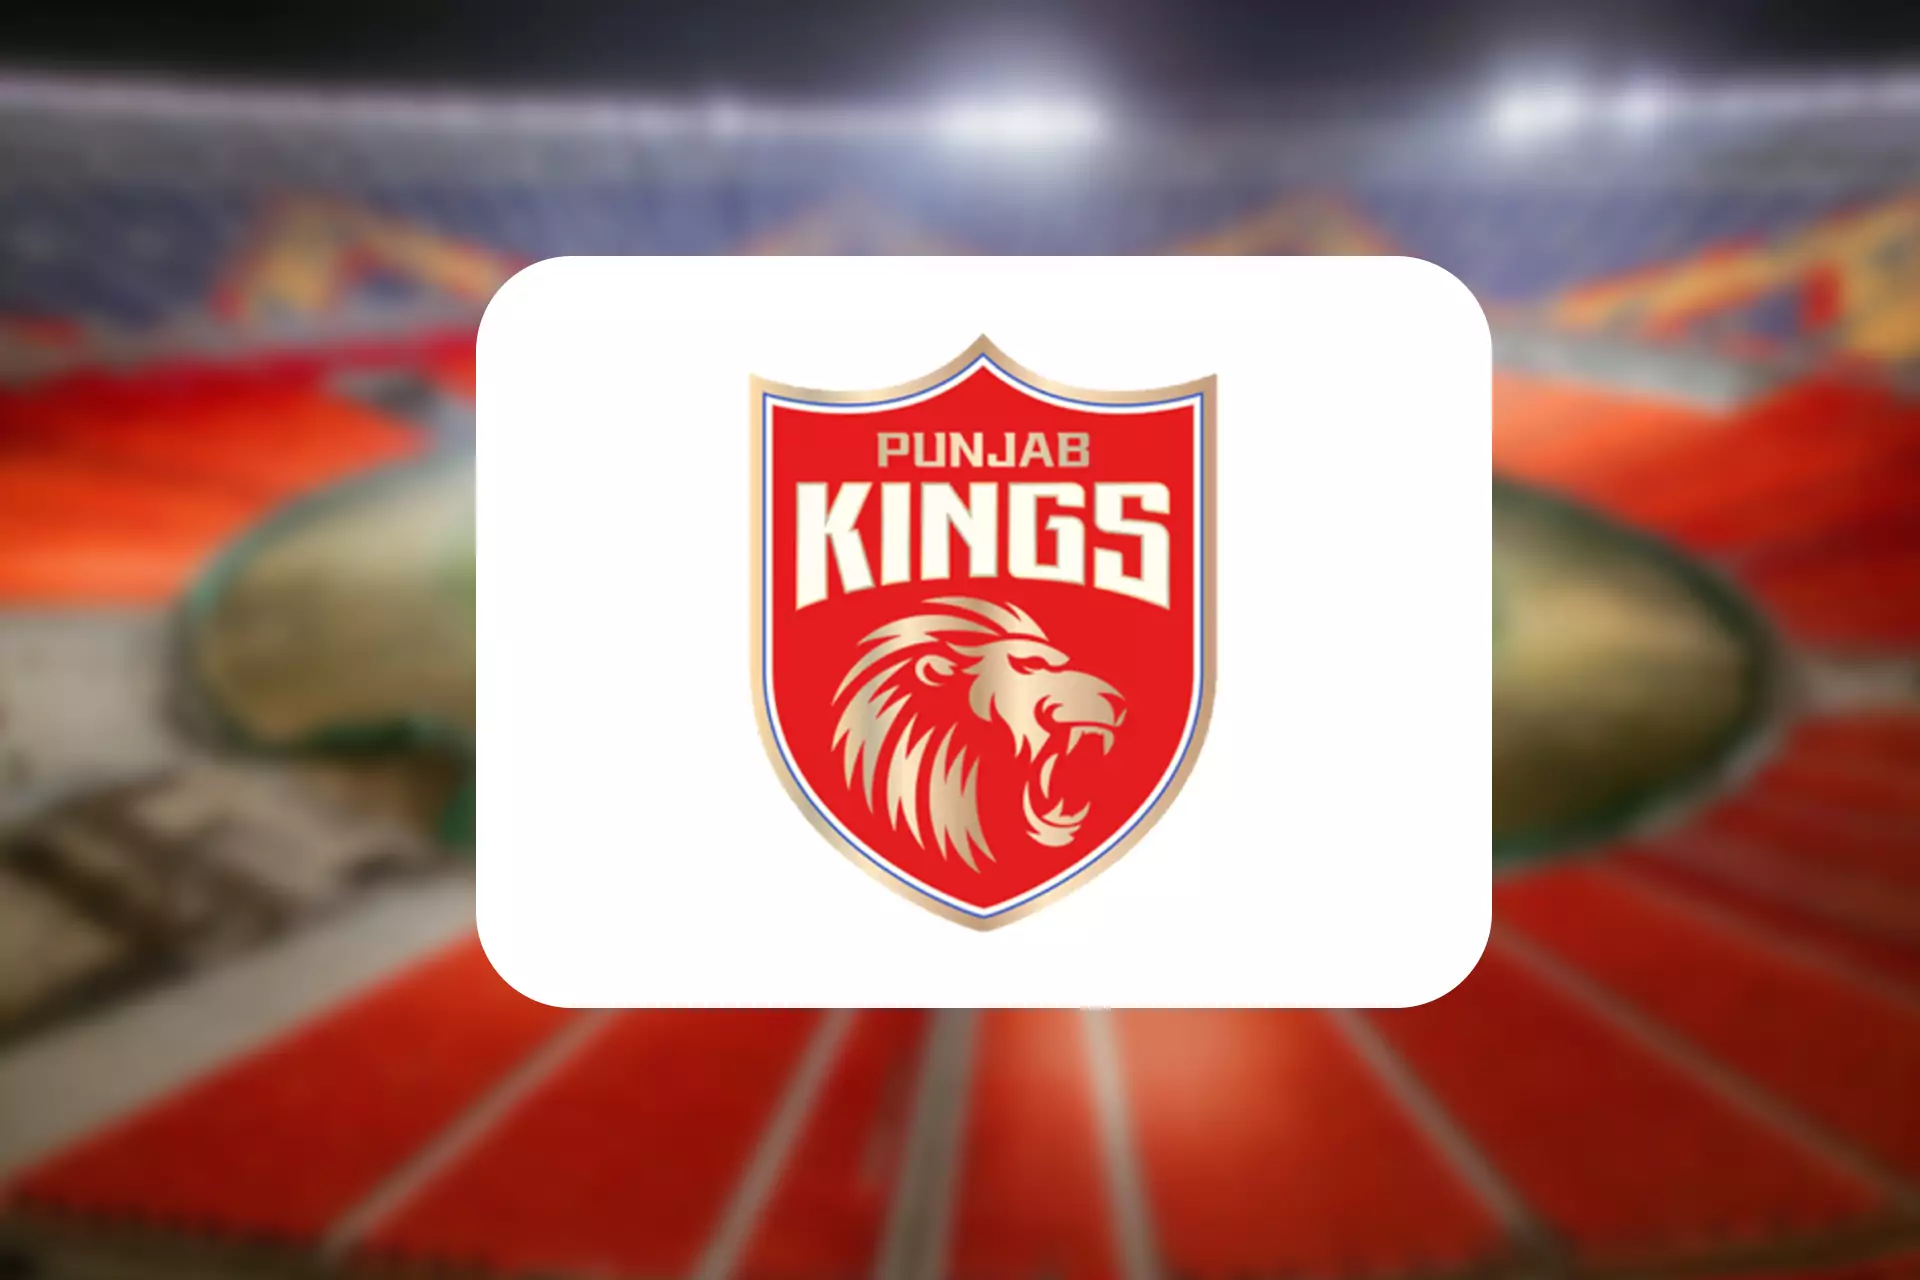 The Punjab Kings team appeared in 1 of the 13 playoffs.